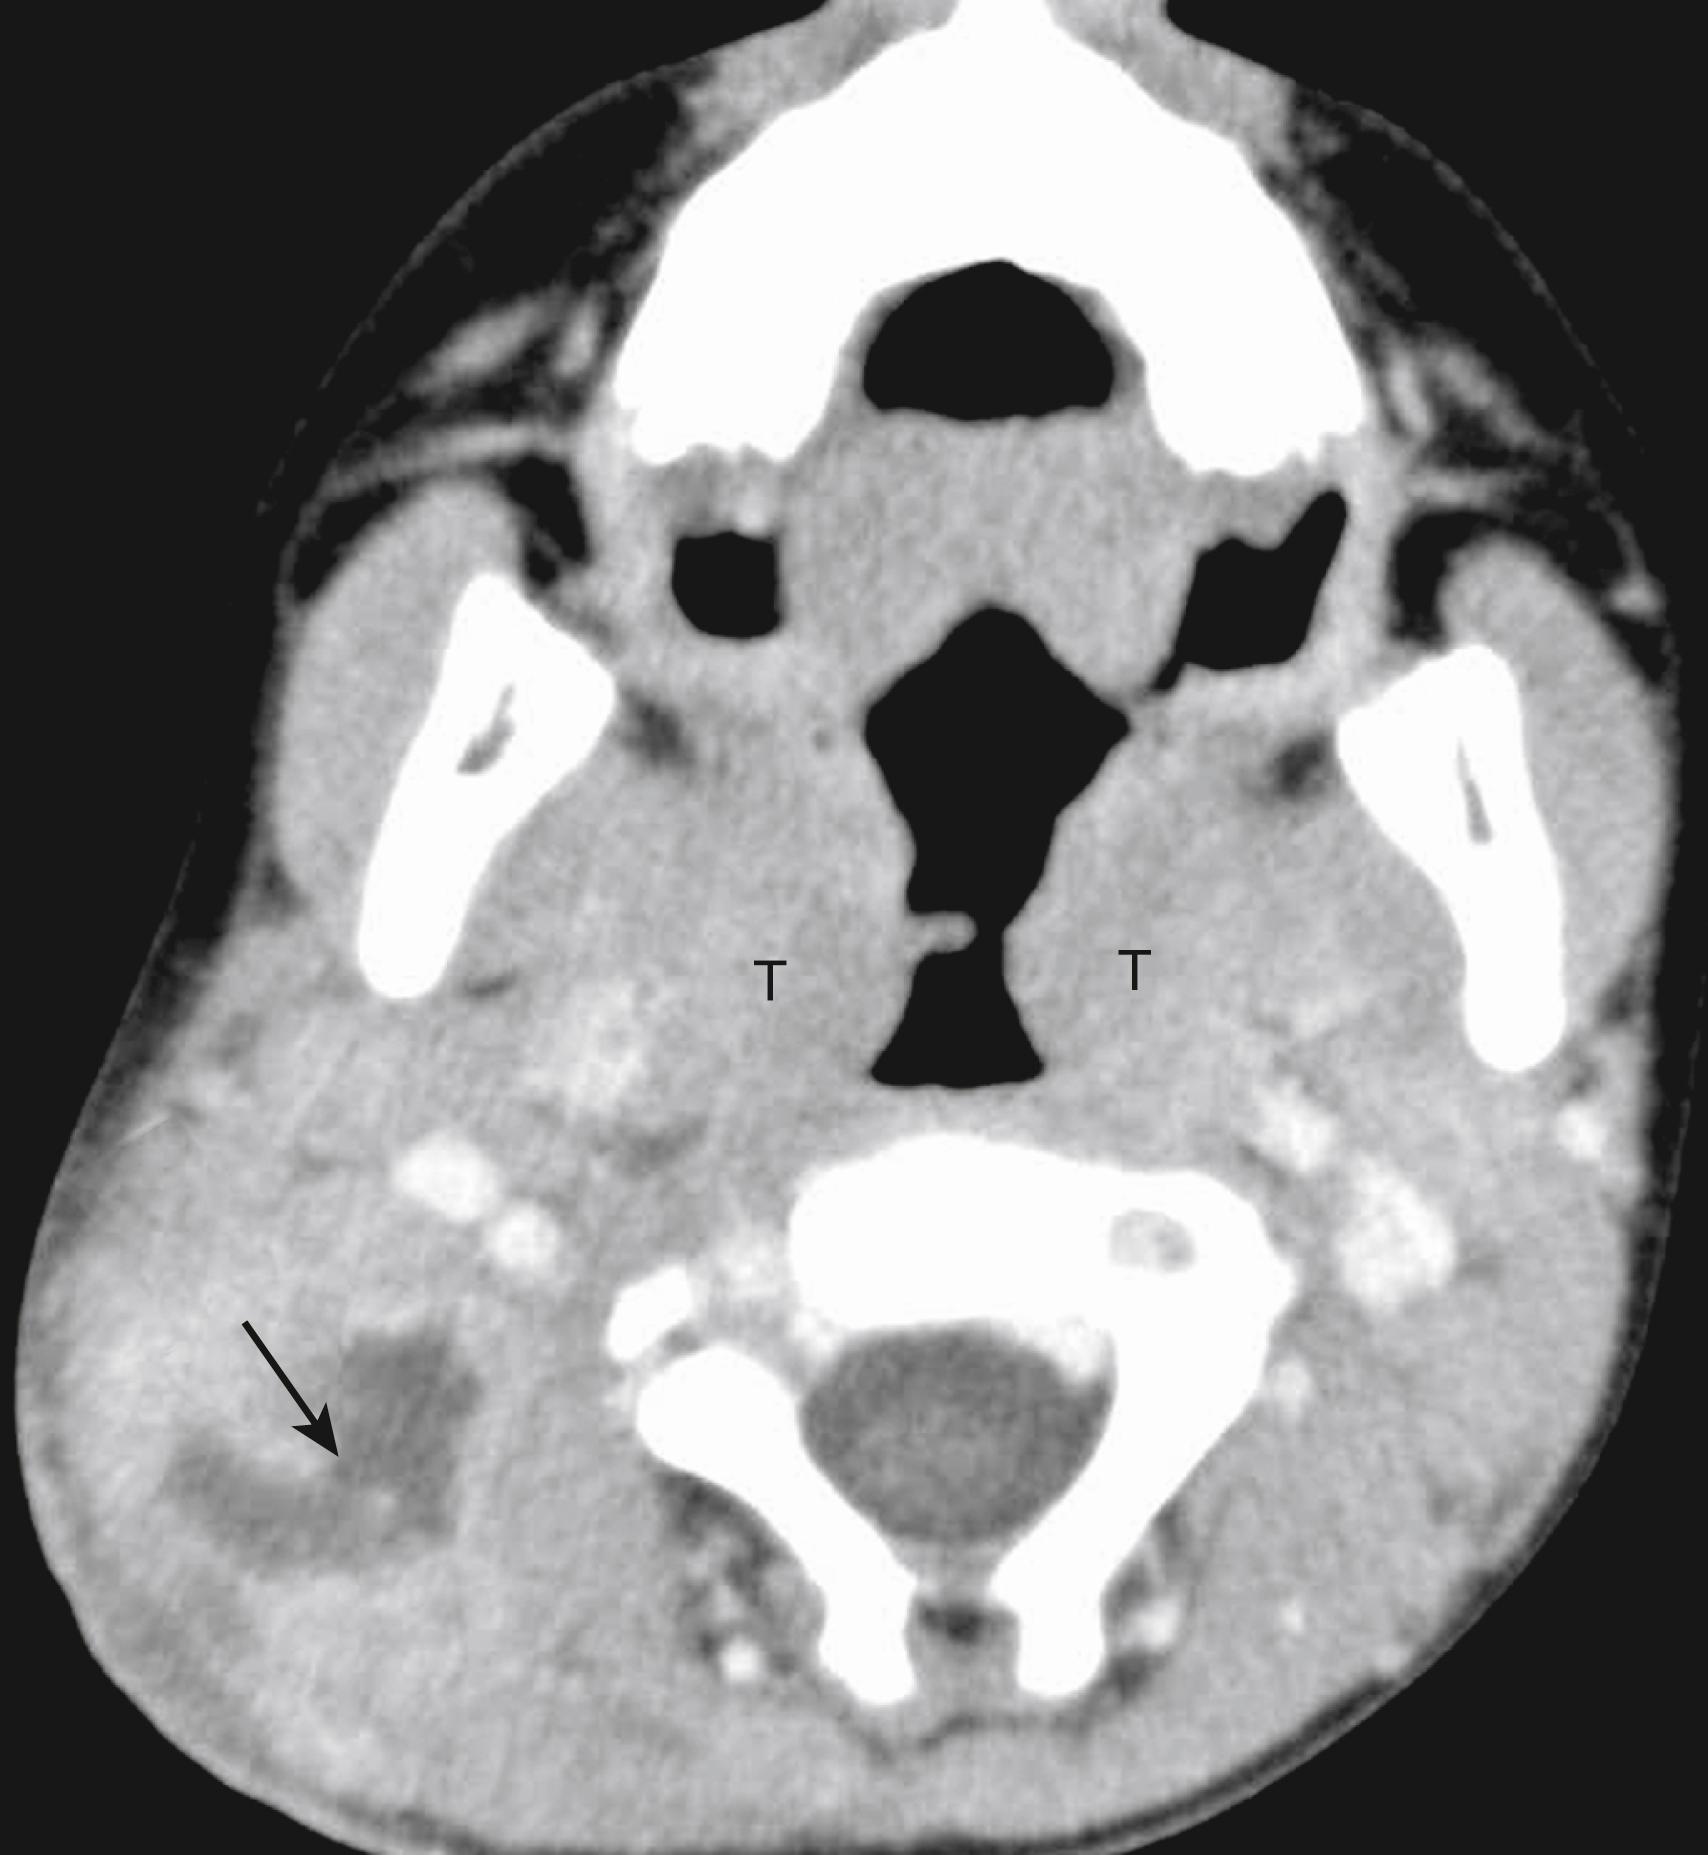 Fig. 48.5, Suppurative lymphadenitis in a 5-year-old female with neck swelling and redness. Contrast-enhanced CT image reveals a group of enlarged nodes in the right posterior triangle with central hypoattenuating necrosis (arrow). Also, note the enlarged tonsils (T) in this child with recurrent tonsillitis.